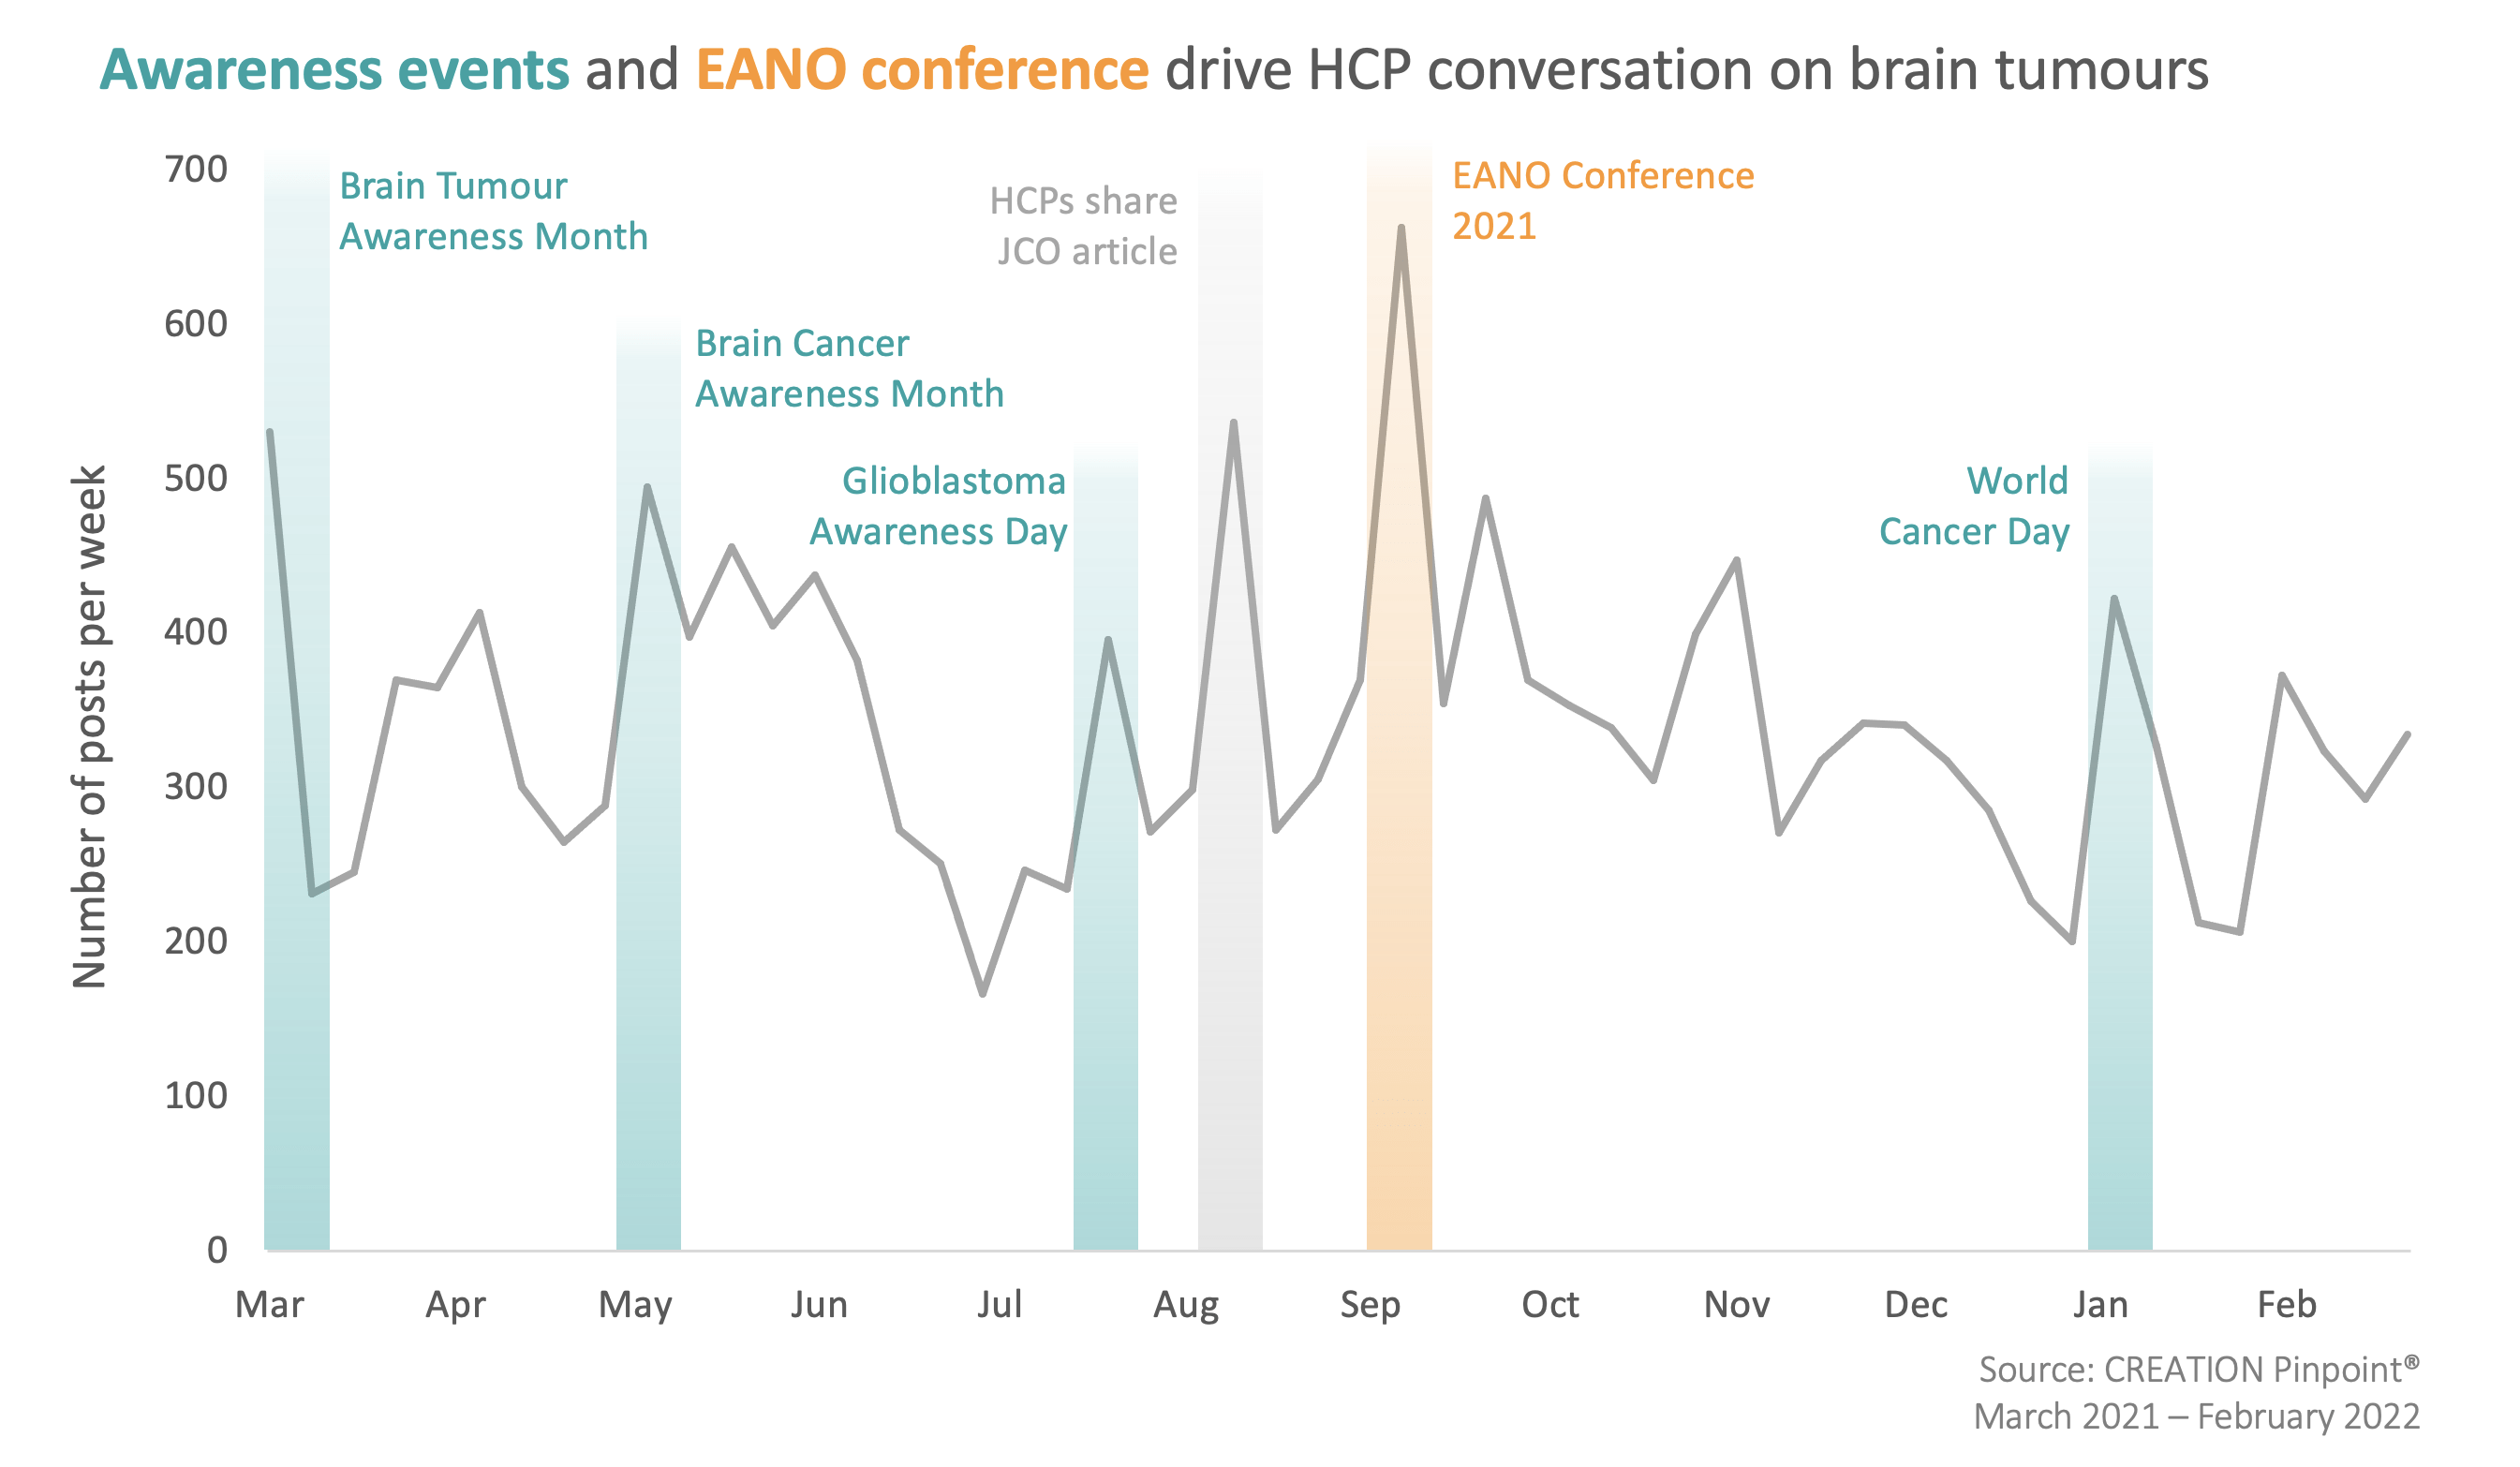 Graph showing awareness events and EANO conference driving HCP conversation